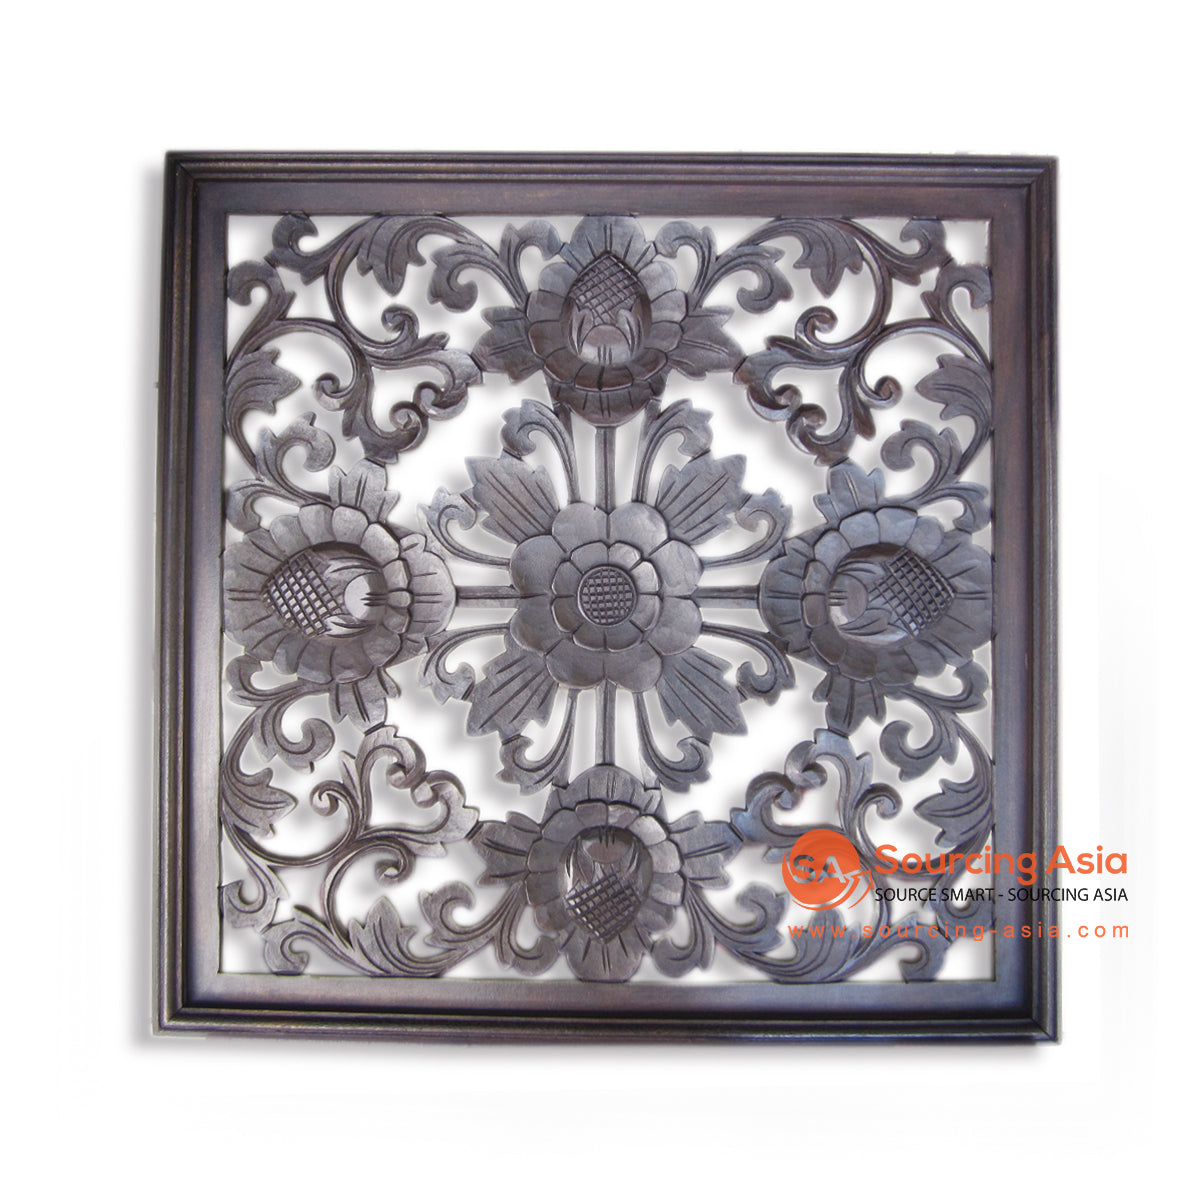 LUH012A-BR BROWN WOODEN FLOWER CARVED PLAQUE